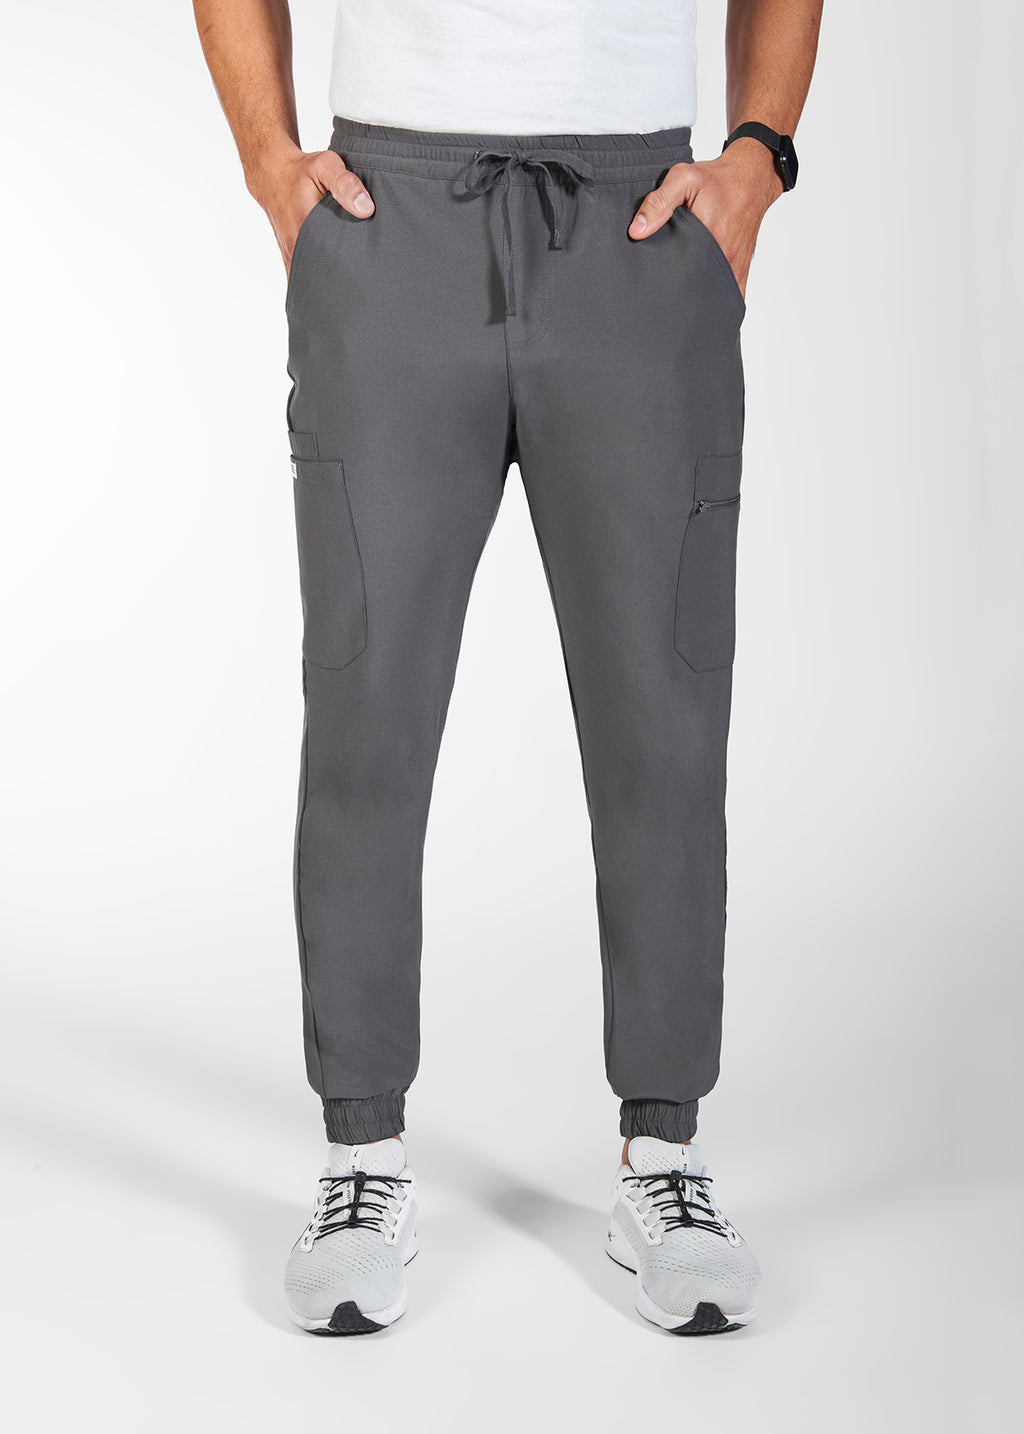 Product - Adrian MOBB Unisex Jogger Fit